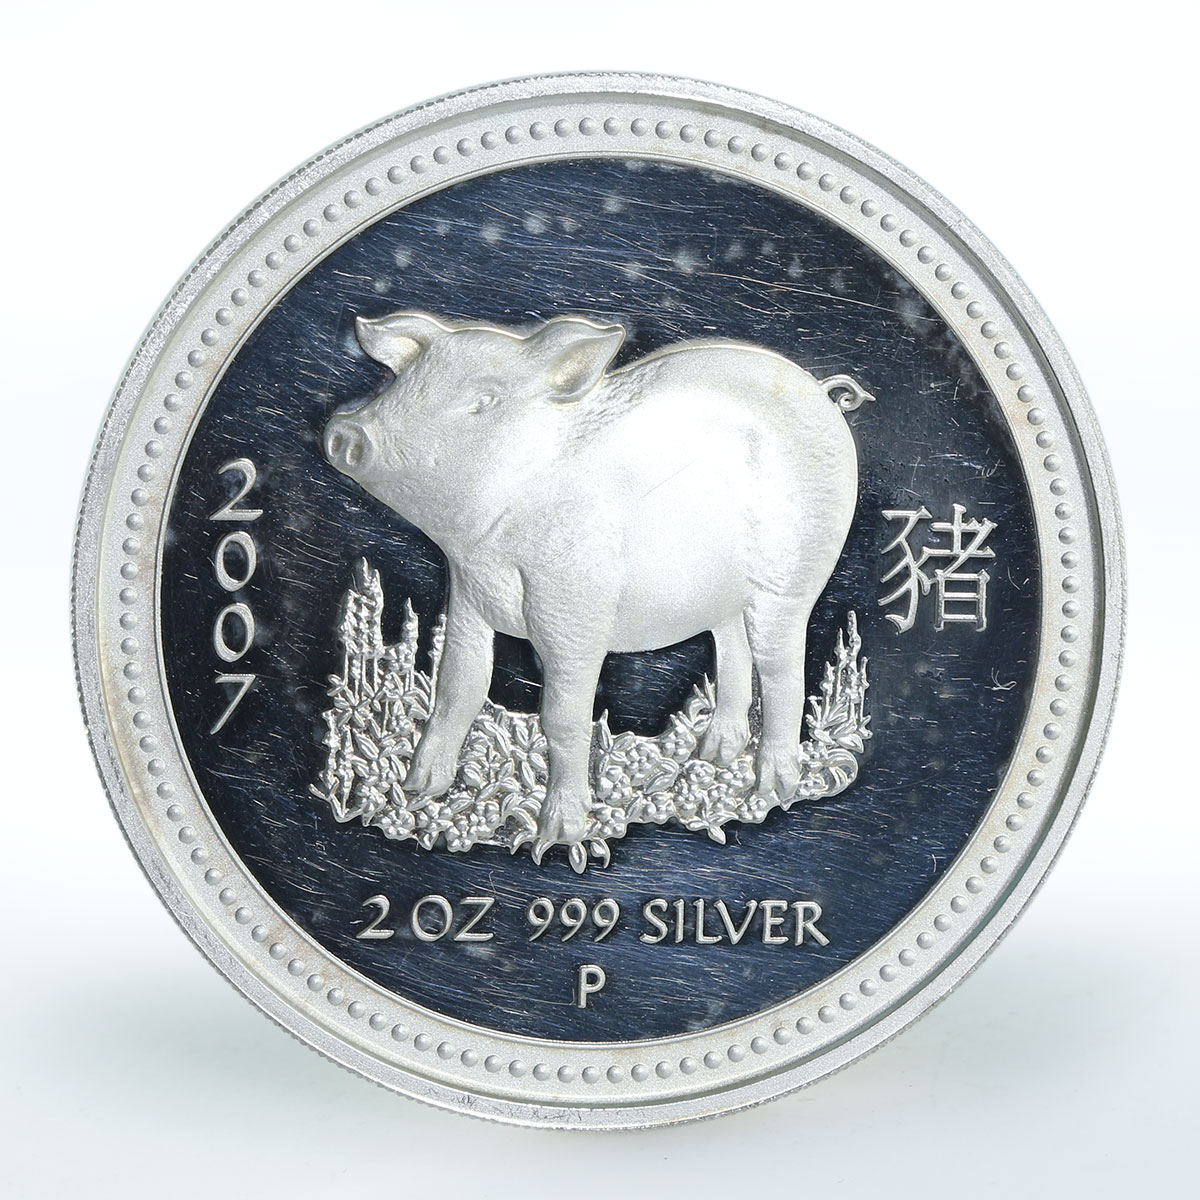 Australia 2 Dollar Year of the Pig Lunar Series I silver proof coin 2007